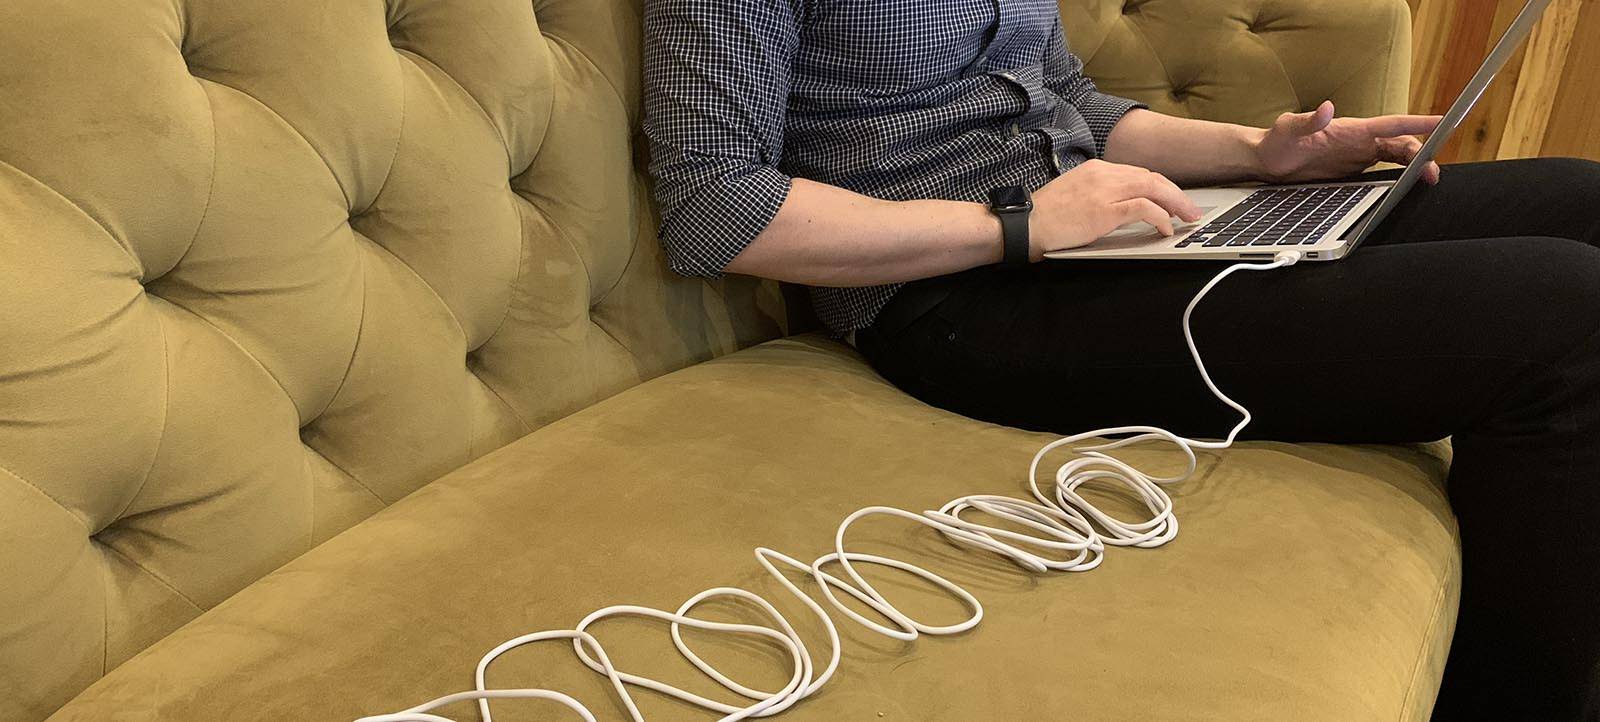 20ft USB-C to USB-C Charger for MacBook